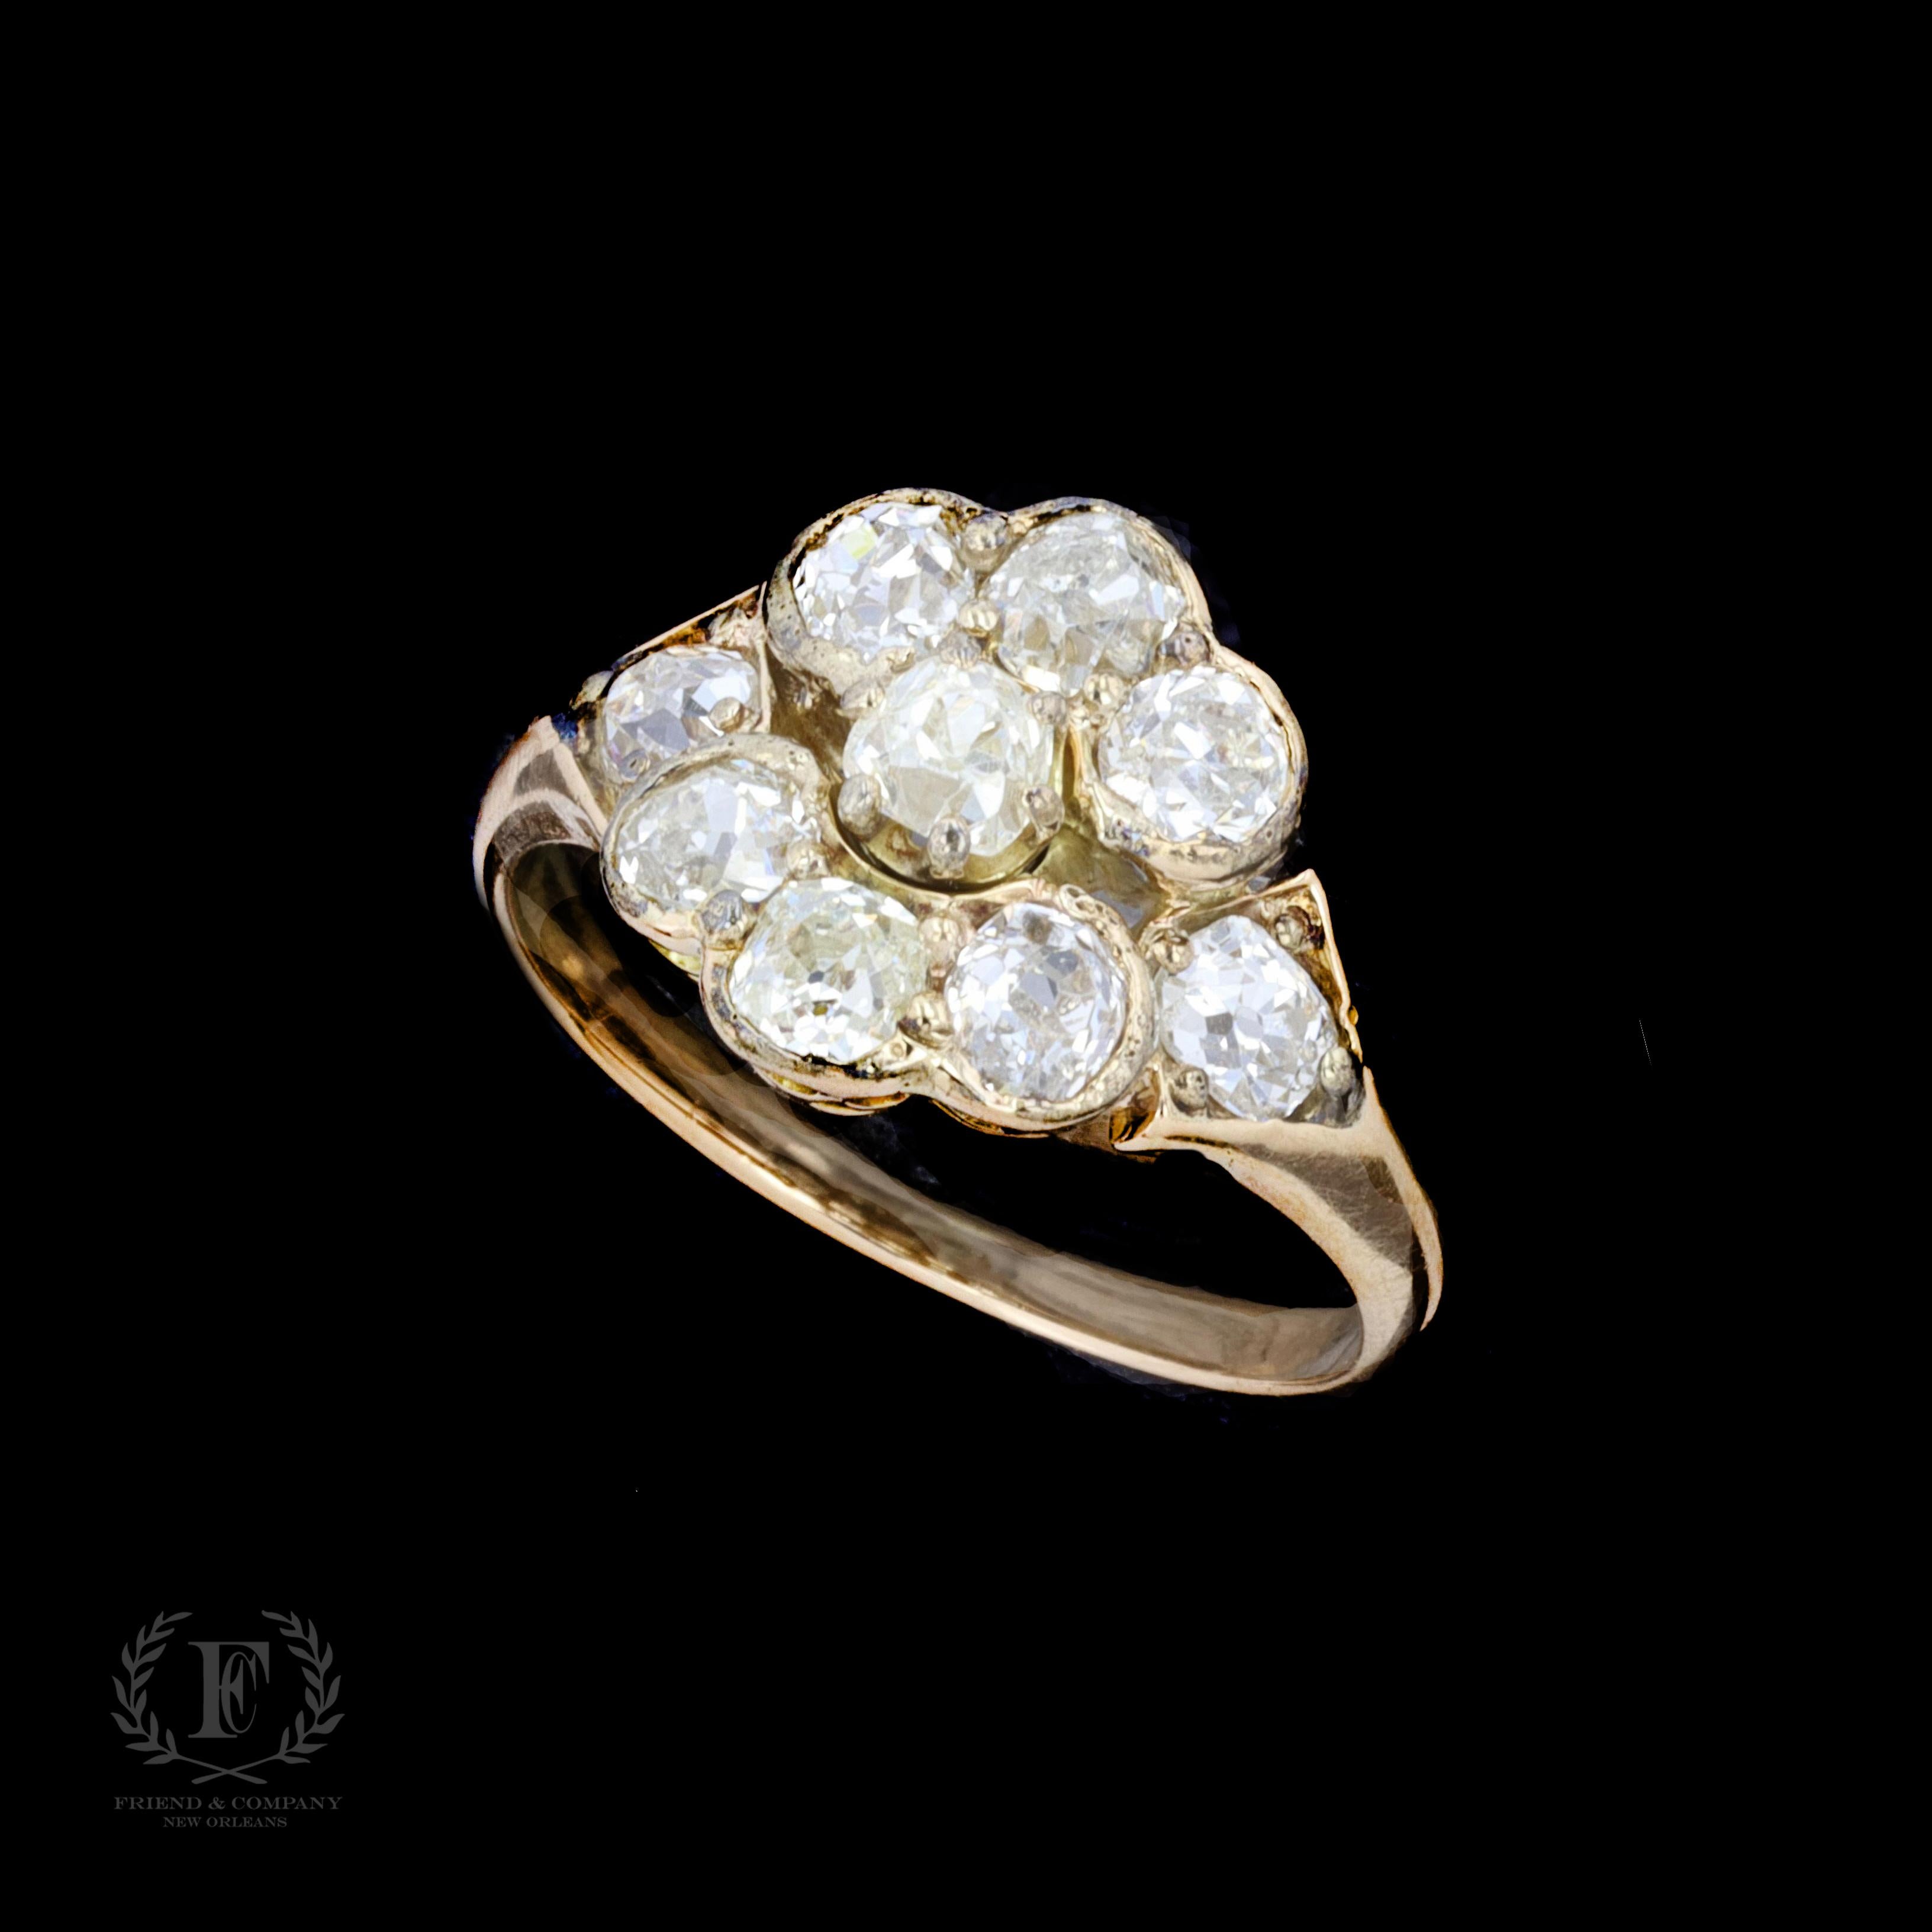 A lovely Victorian flower ring set with old mine cut diamonds that weigh approximately 1.50 carats. The color of the diamonds is J-K with VS2-SI clarity. The ring is stamped 14K and weighs 4.8 grams. The ring is a size 7 1/4, but it can be re-sized.